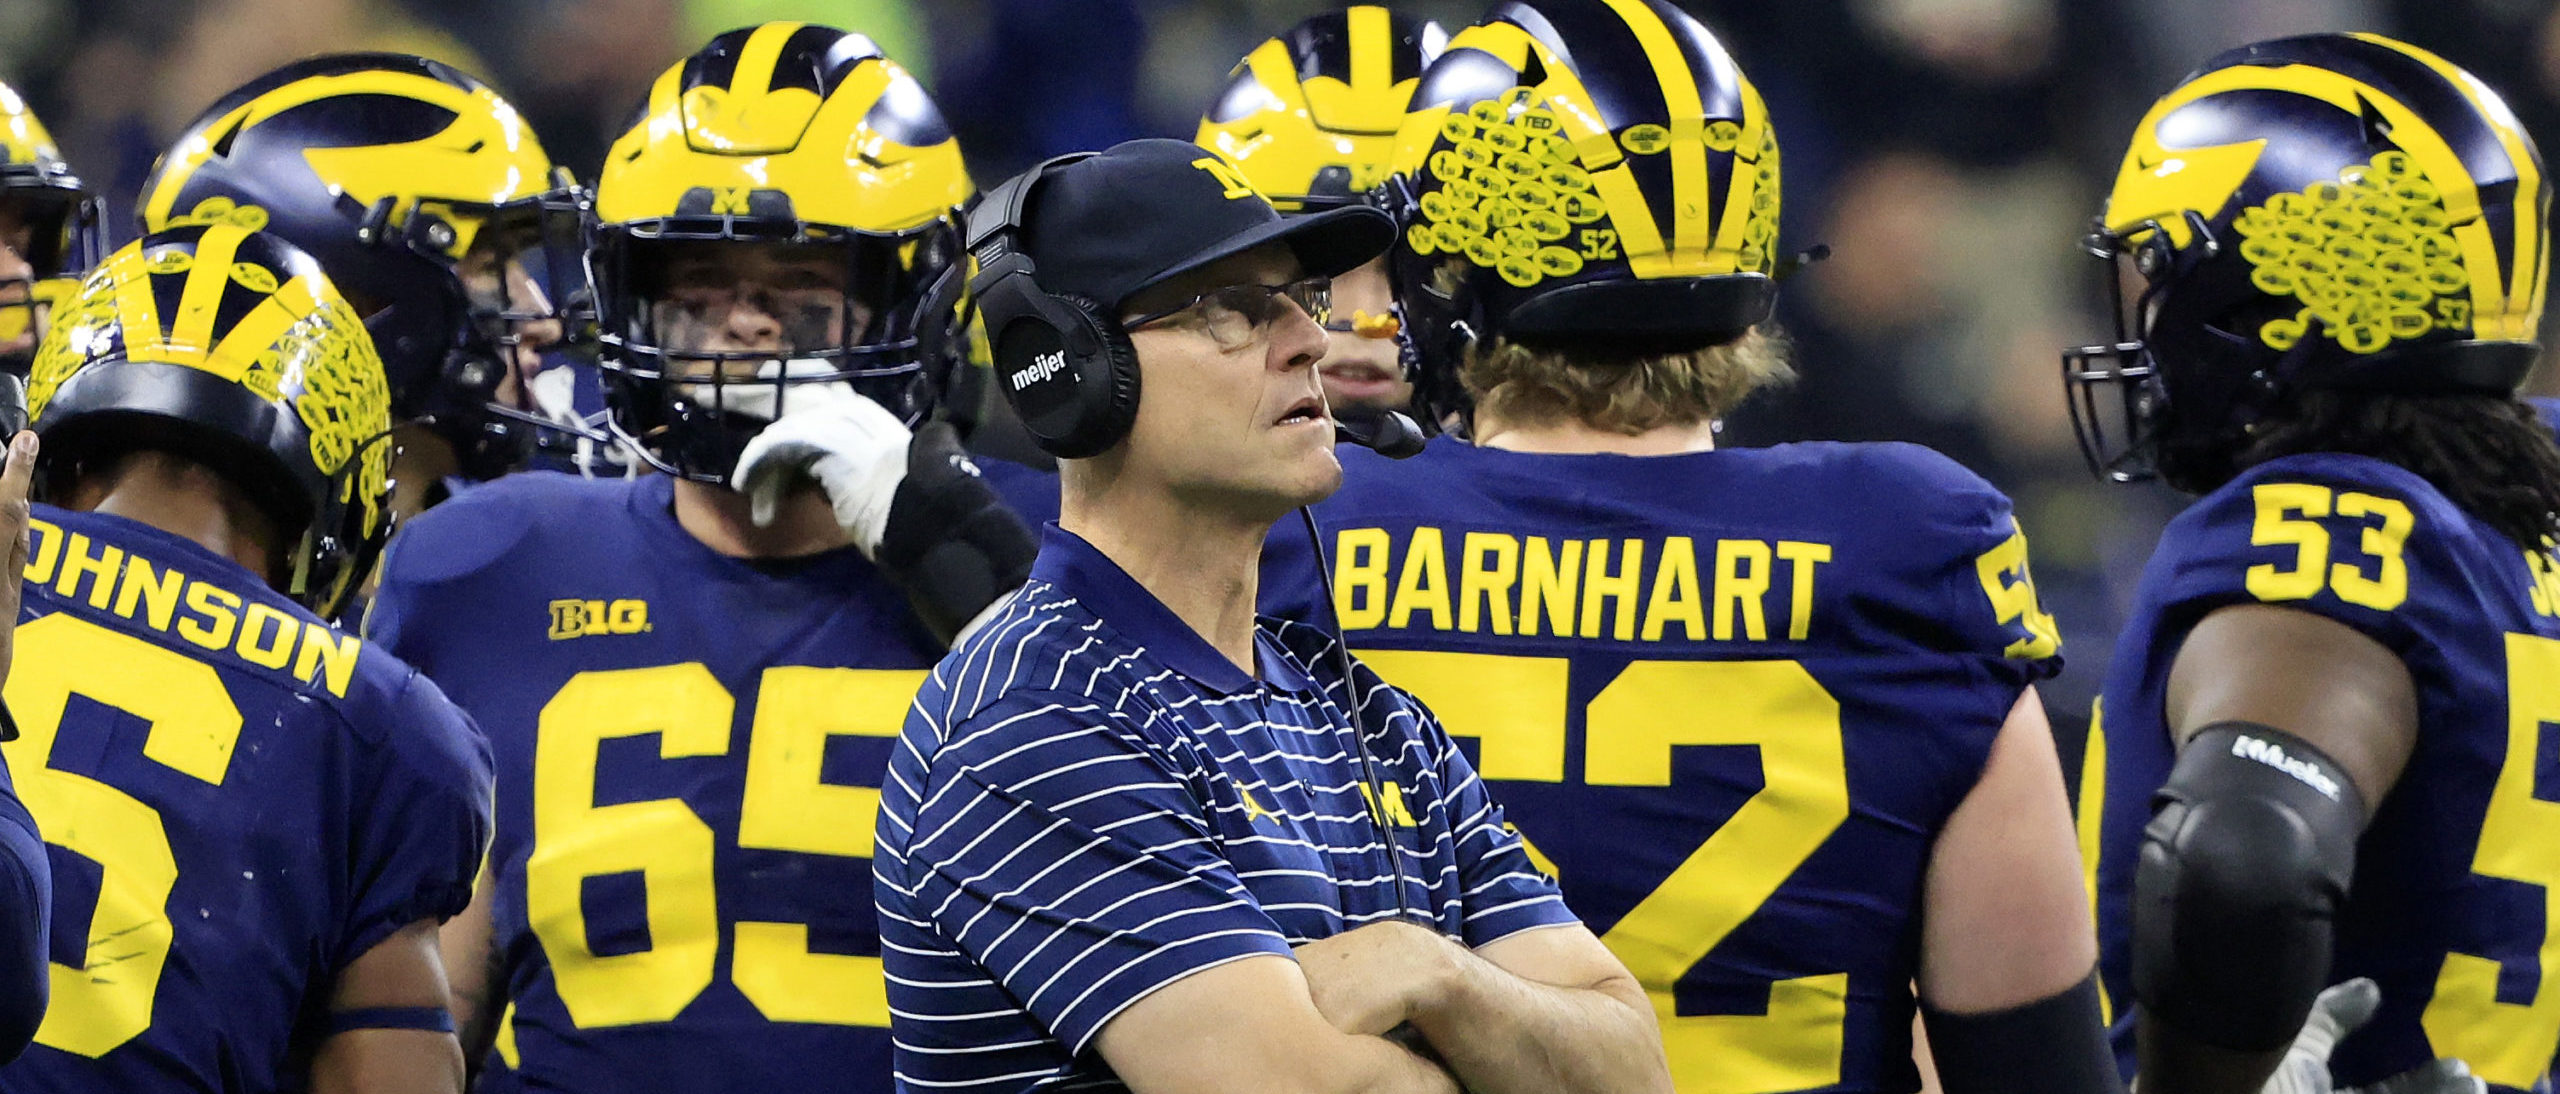 University Of Michigan Announces Jim Harbaugh Will Be Returning As Head  Coach In 2023 Amid Ongoing NCAA Investigation | The Daily Caller